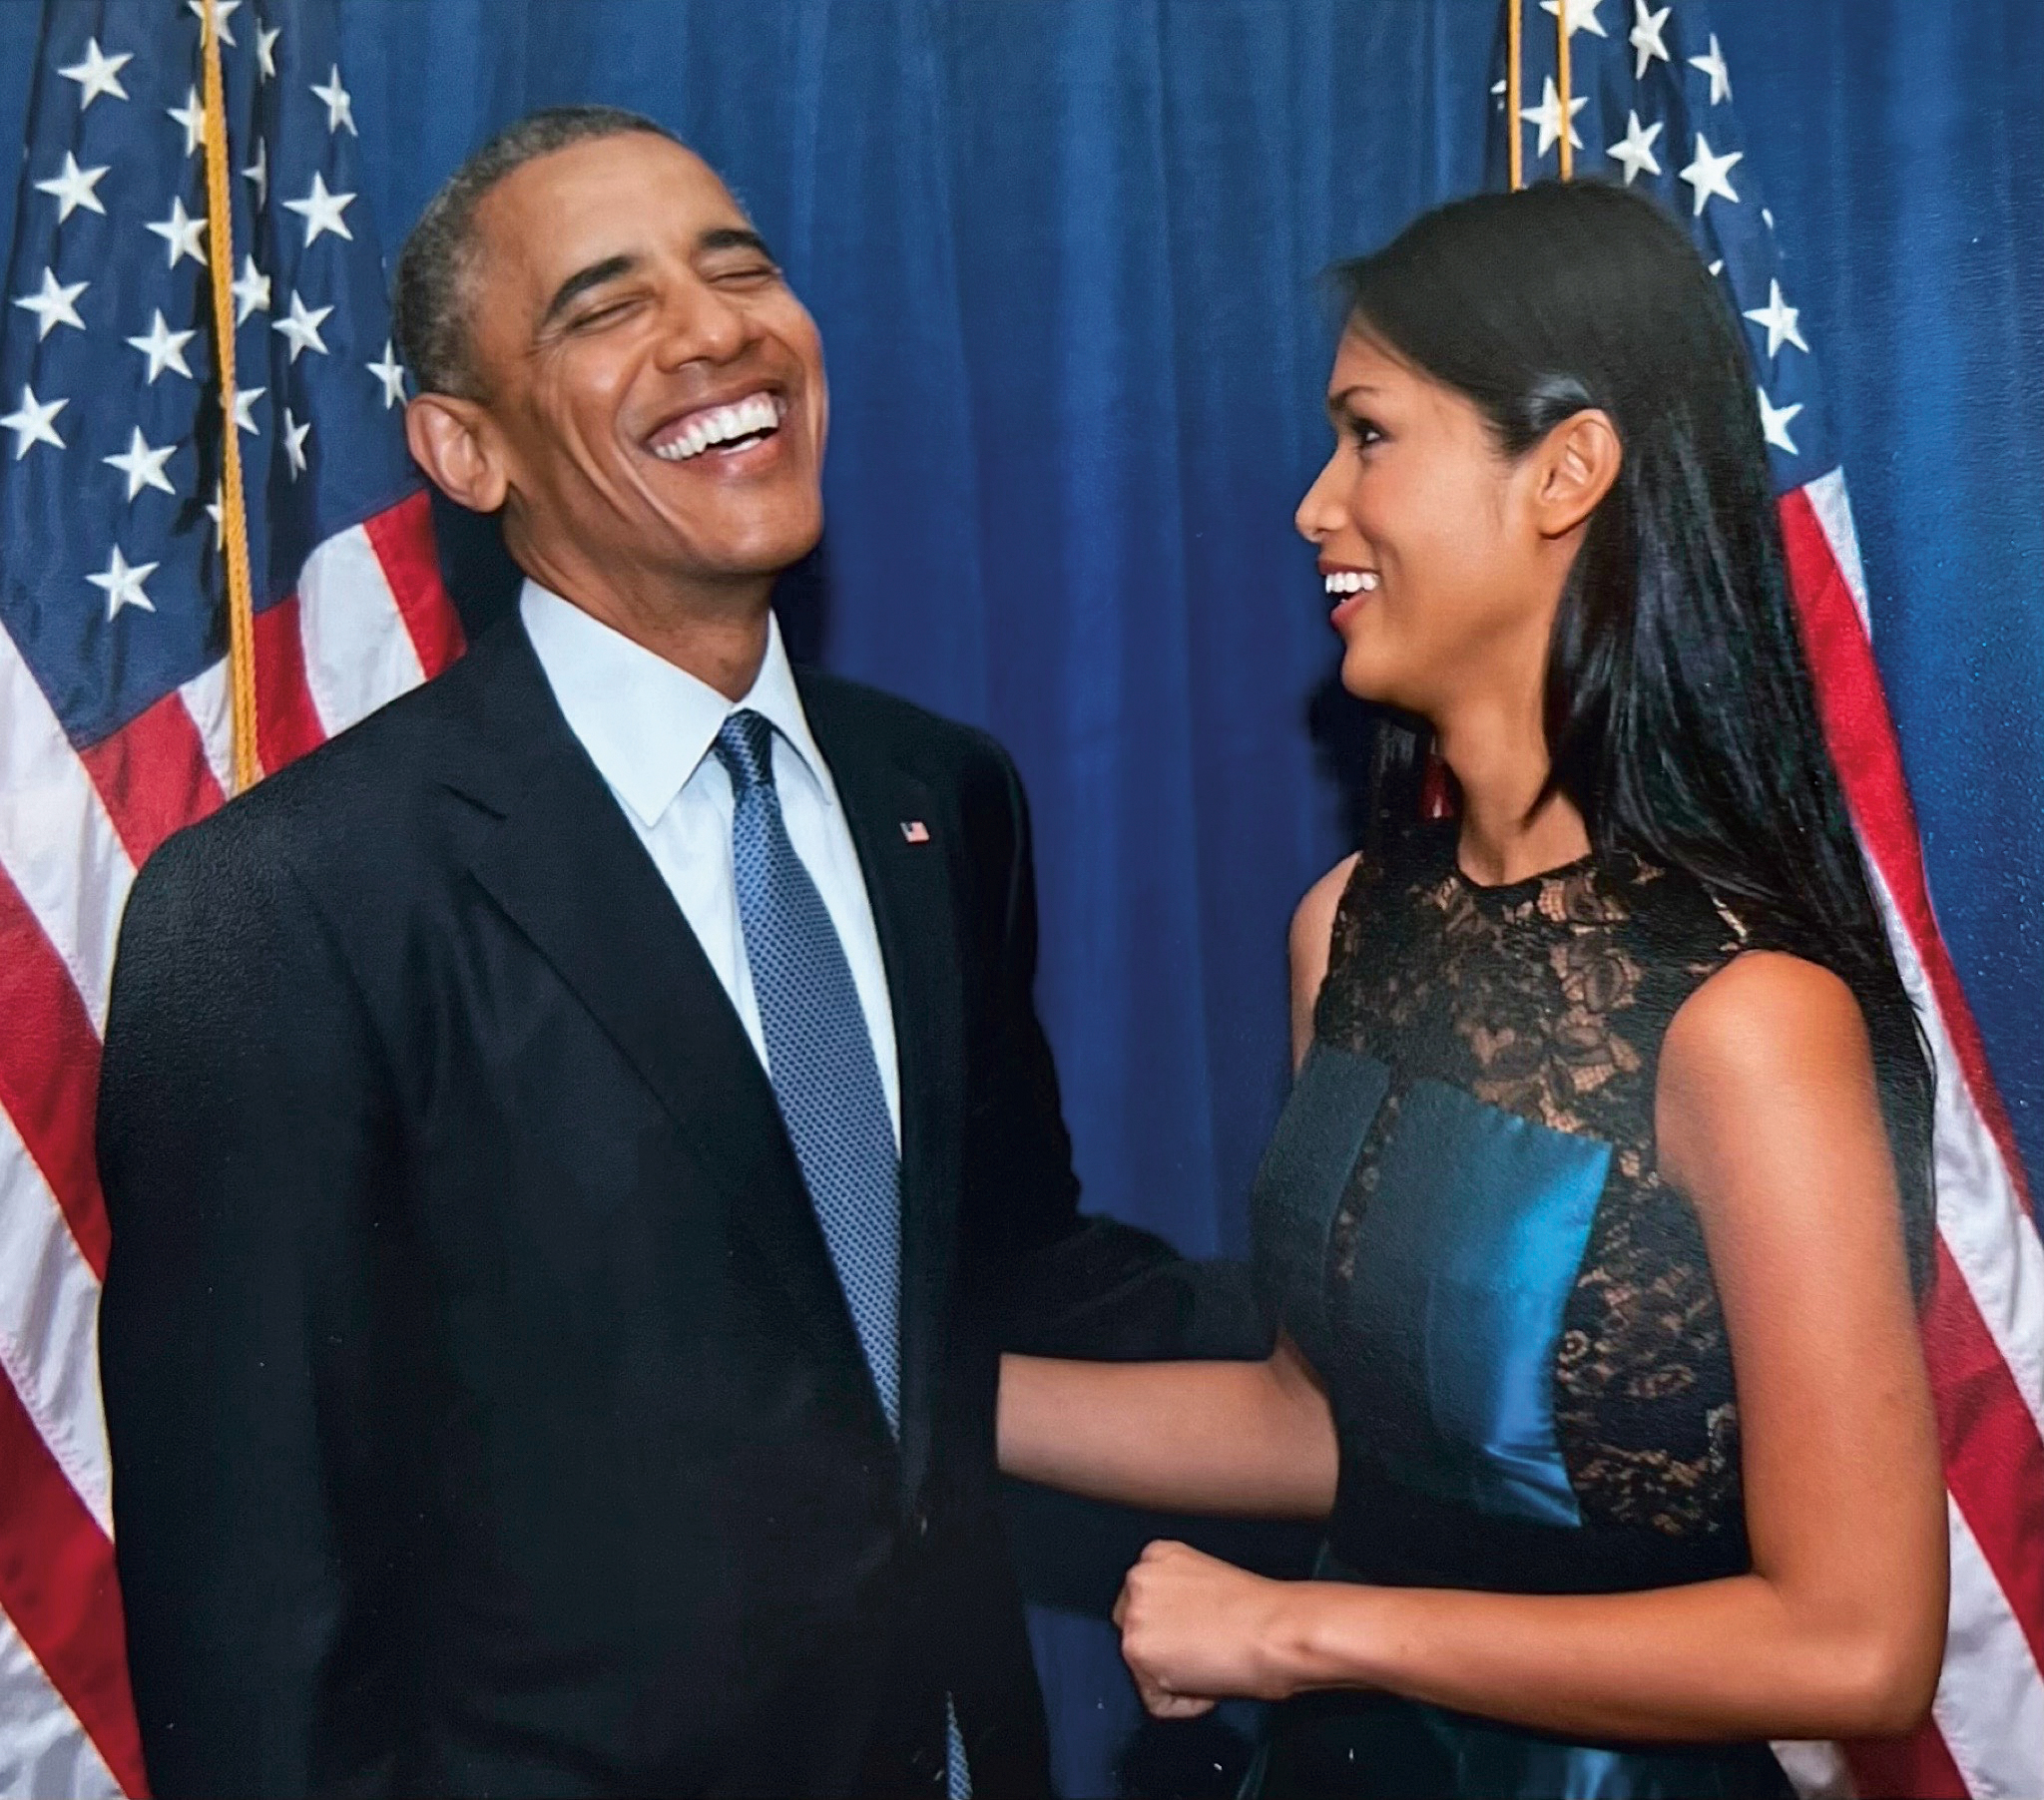 PHOTO: Geena Rocero and former President Barack Obama during the DNC LGBT Gala.